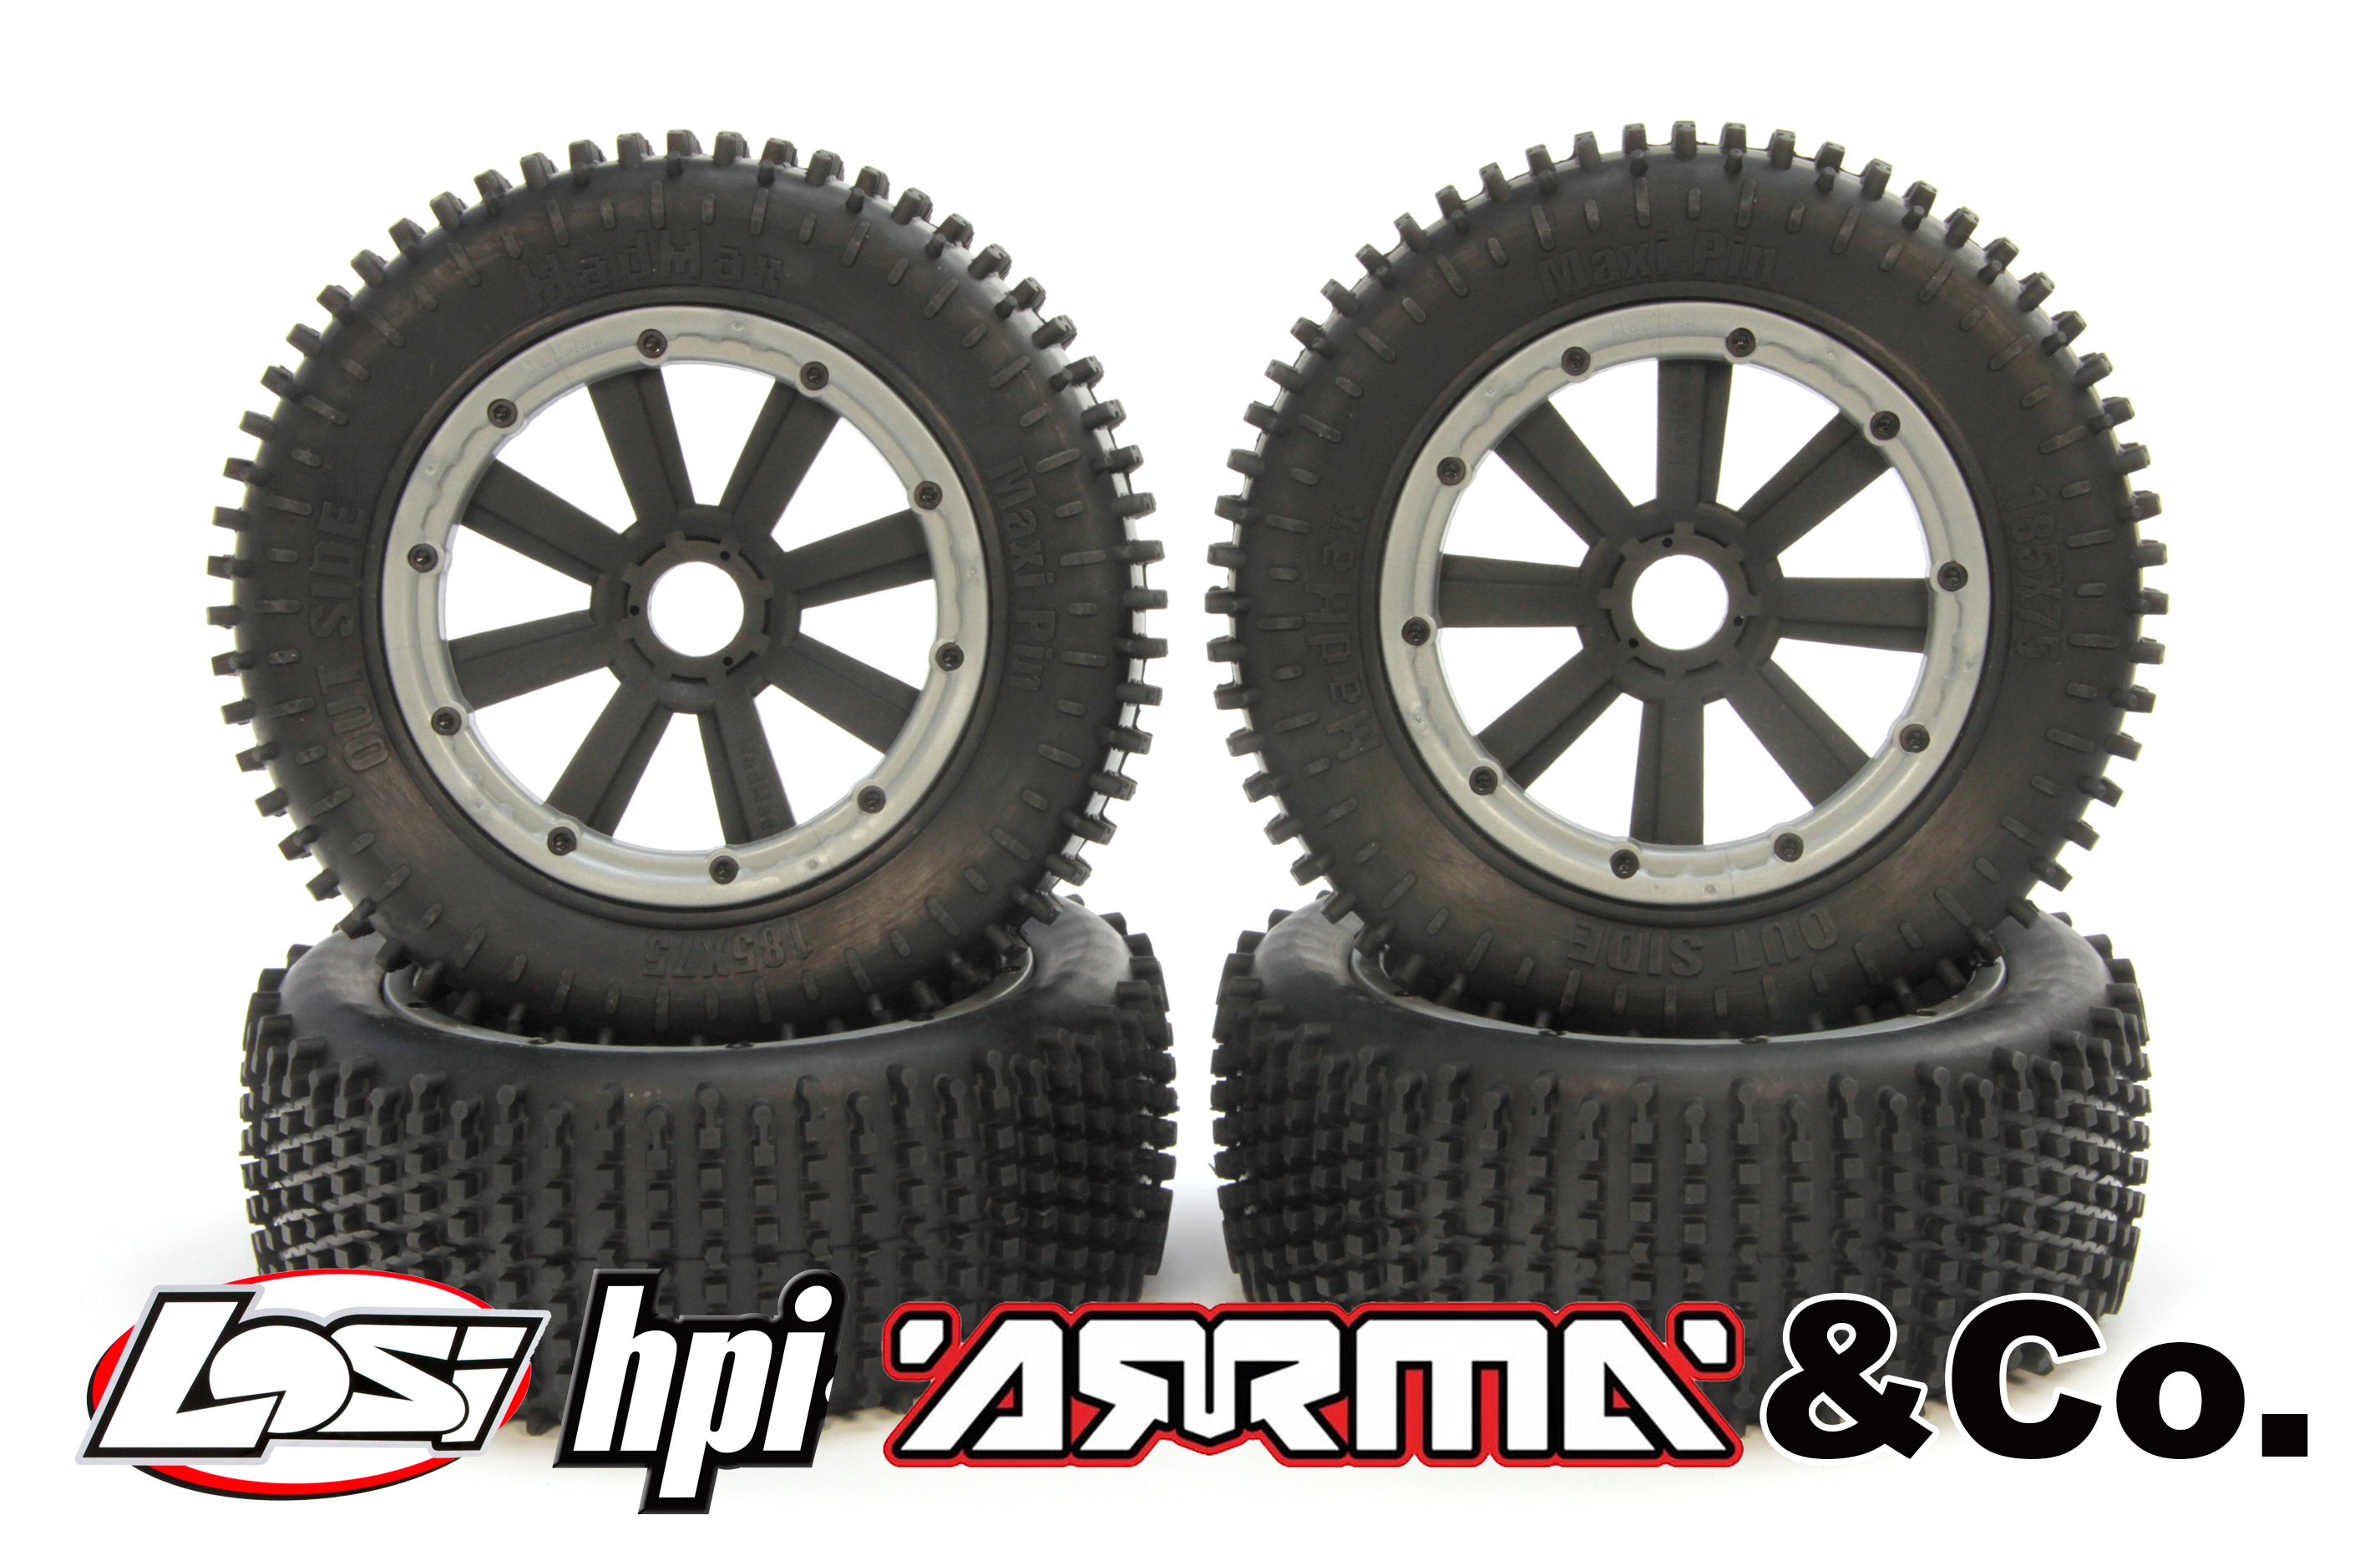 y1446/01 MadMax MAXI PIN tires for Losi and HPI (24 mm hex drive) Offer